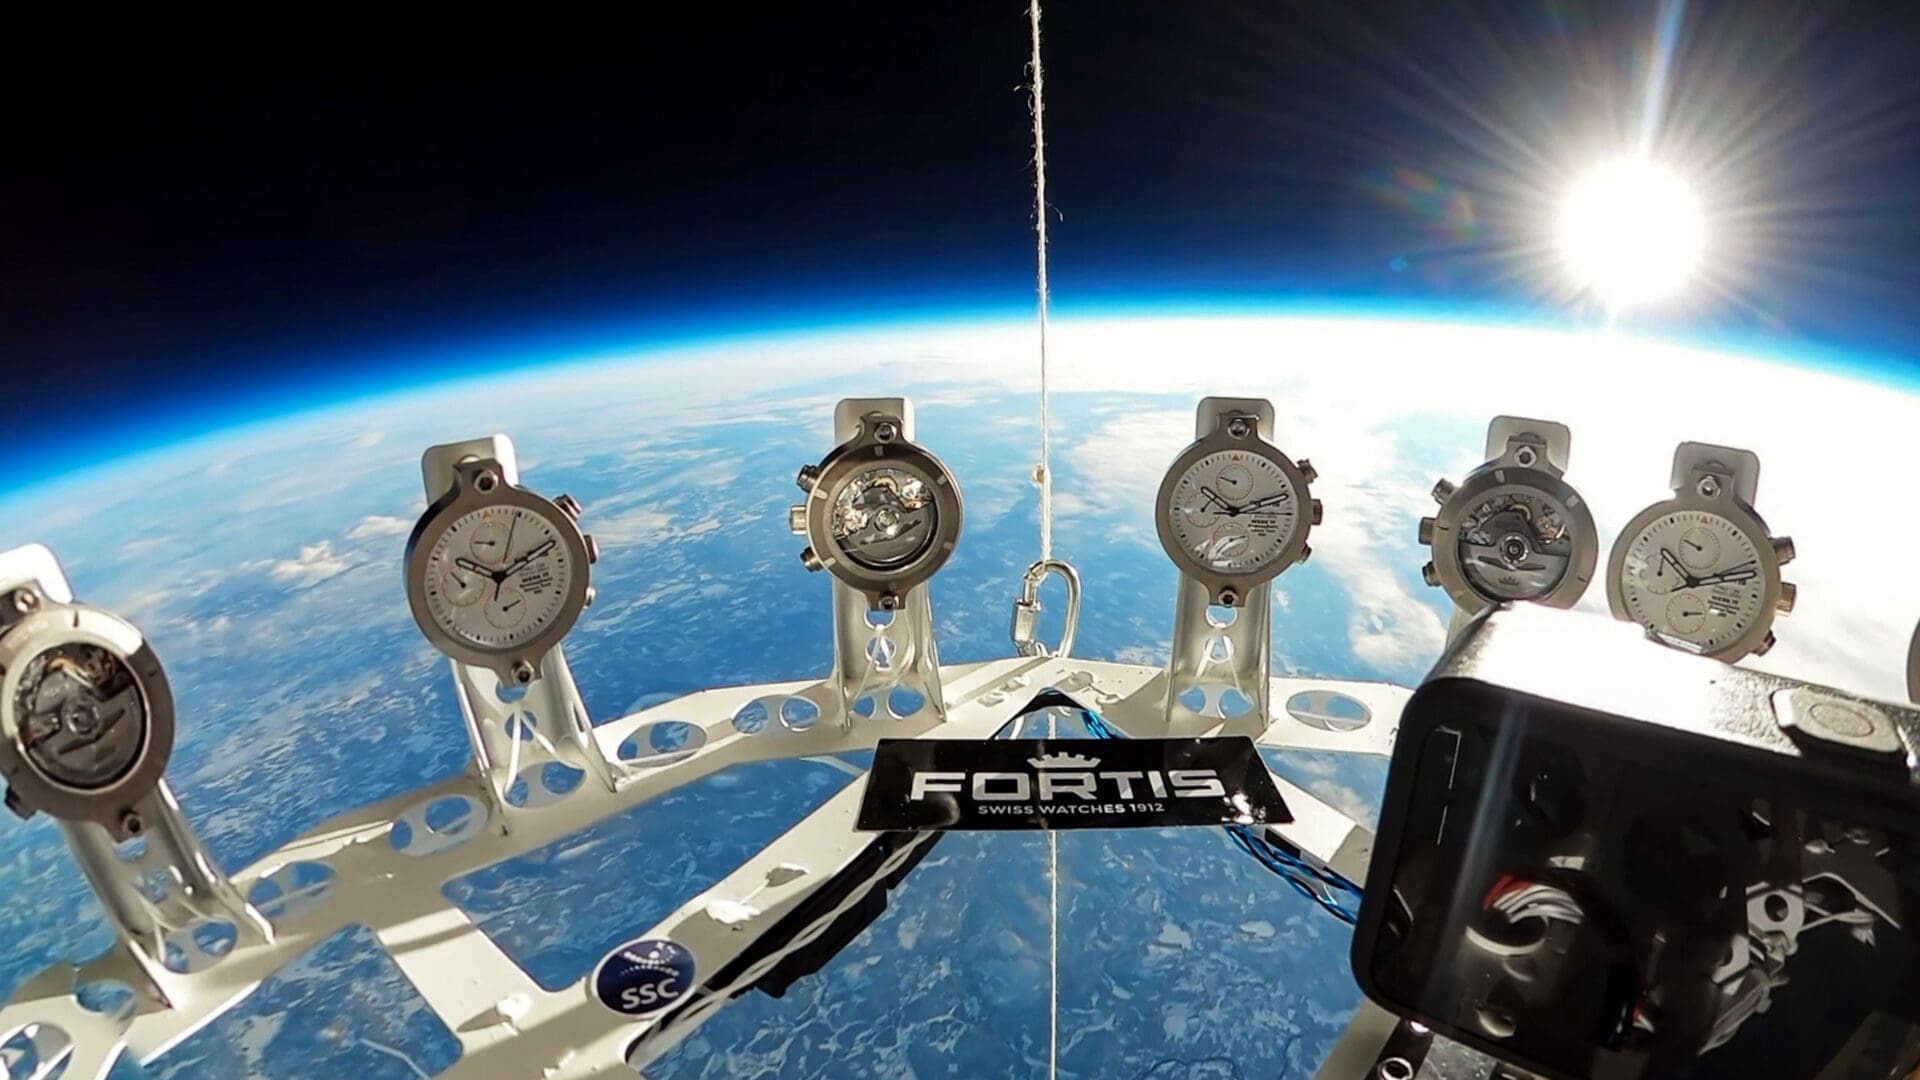 Why Fortis is sending their latest new movement into space